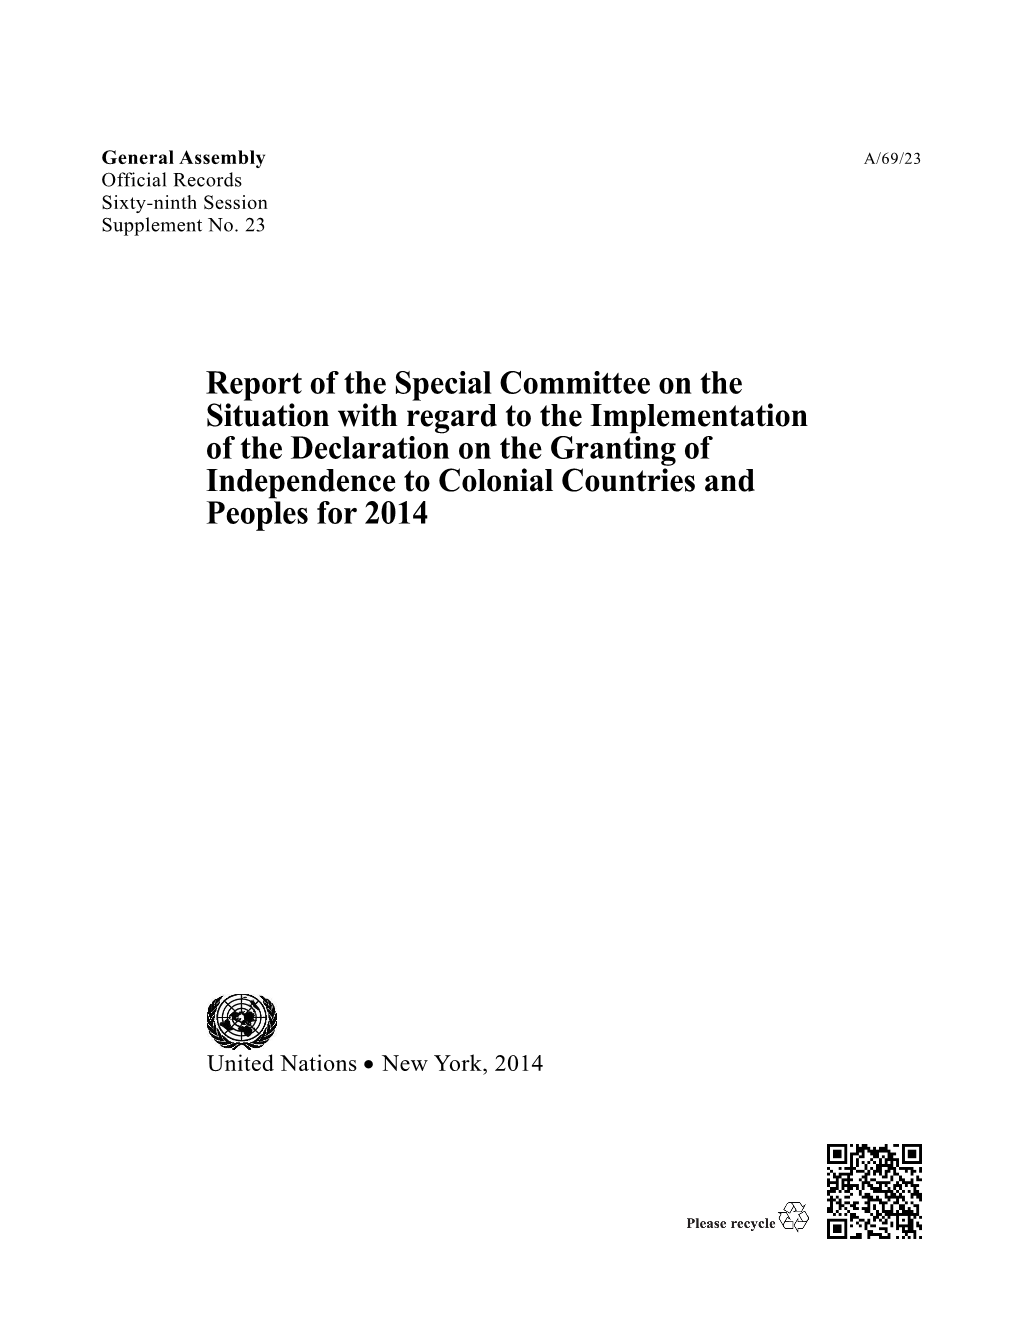 Report of the Special Committee on the Situation With